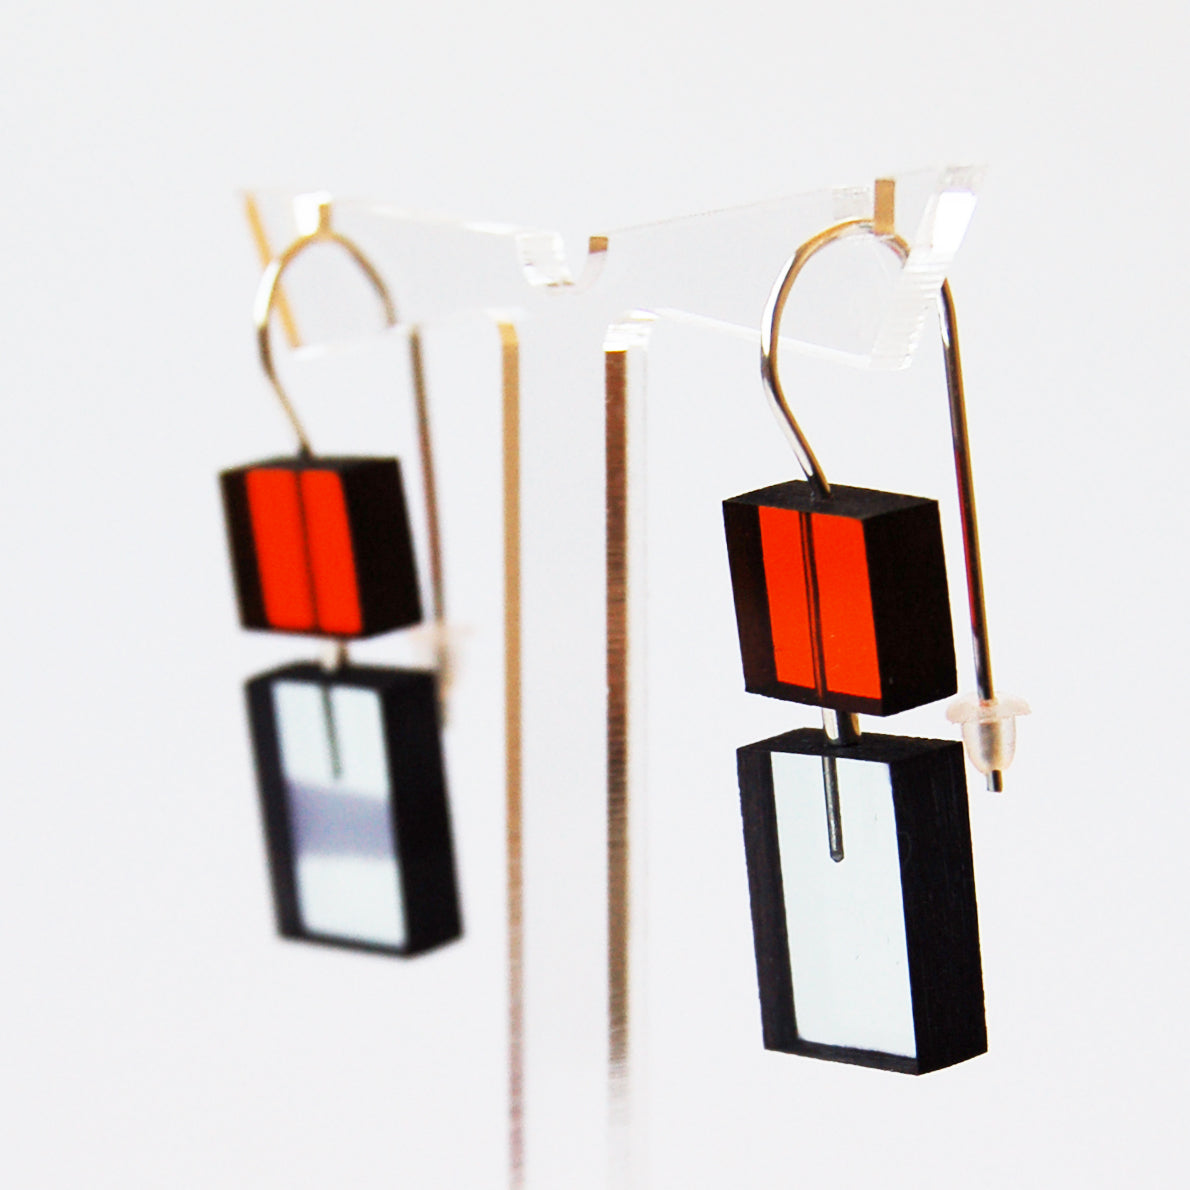 Orange and Grey Construction Earrings